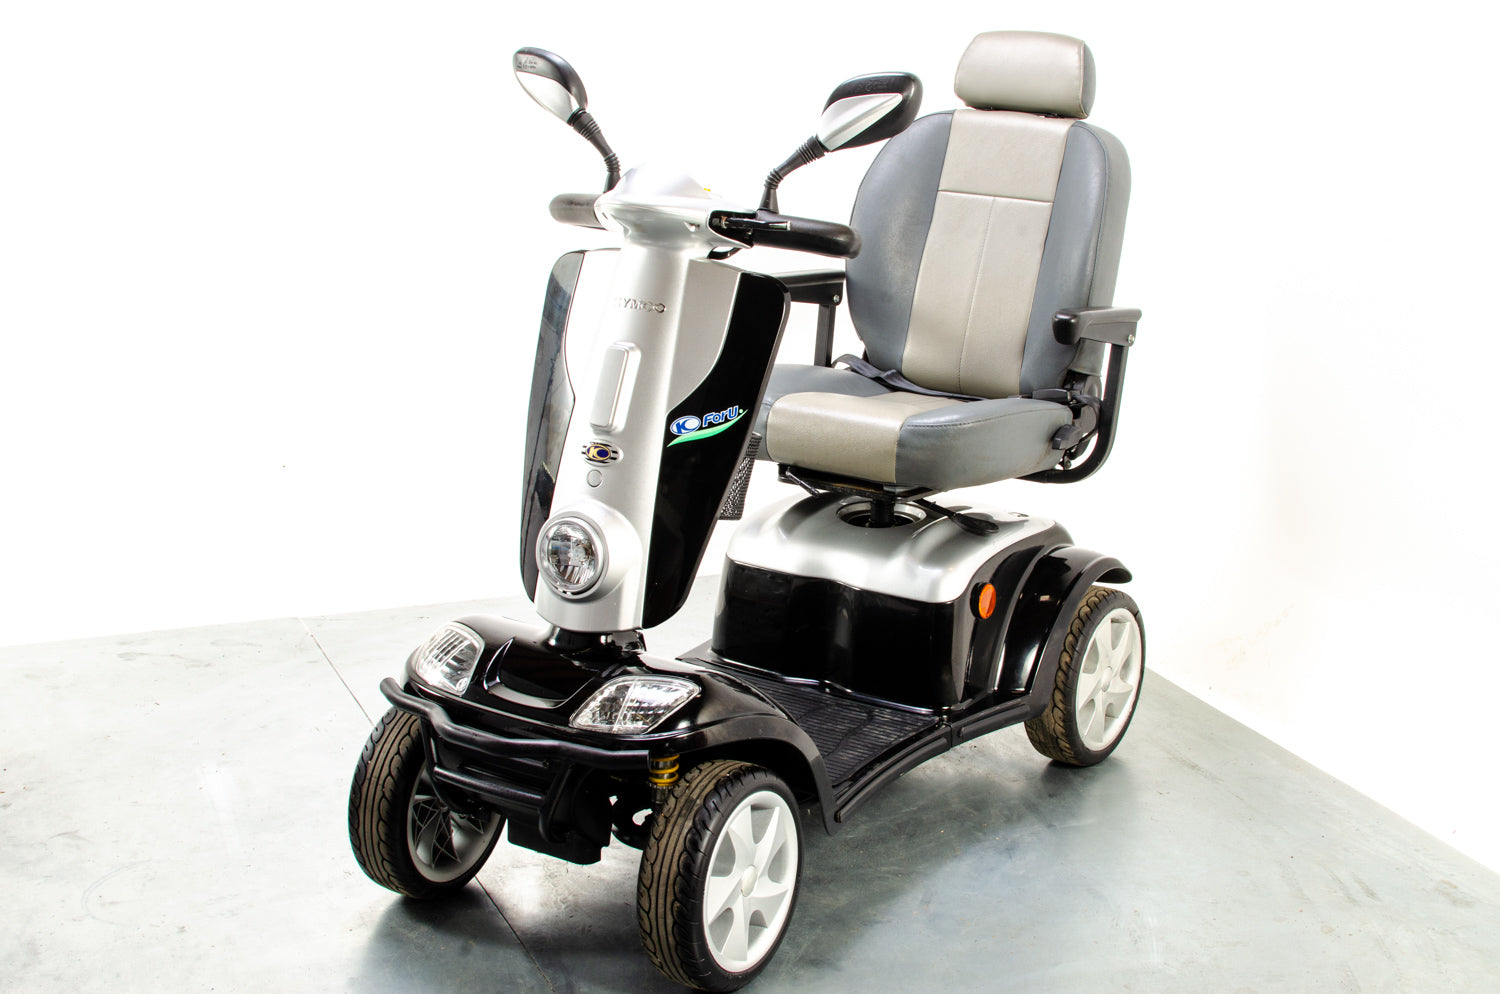 Kymco Maxi XLS Used Mobility Scooter Large All-Terrain 8mph Suspension